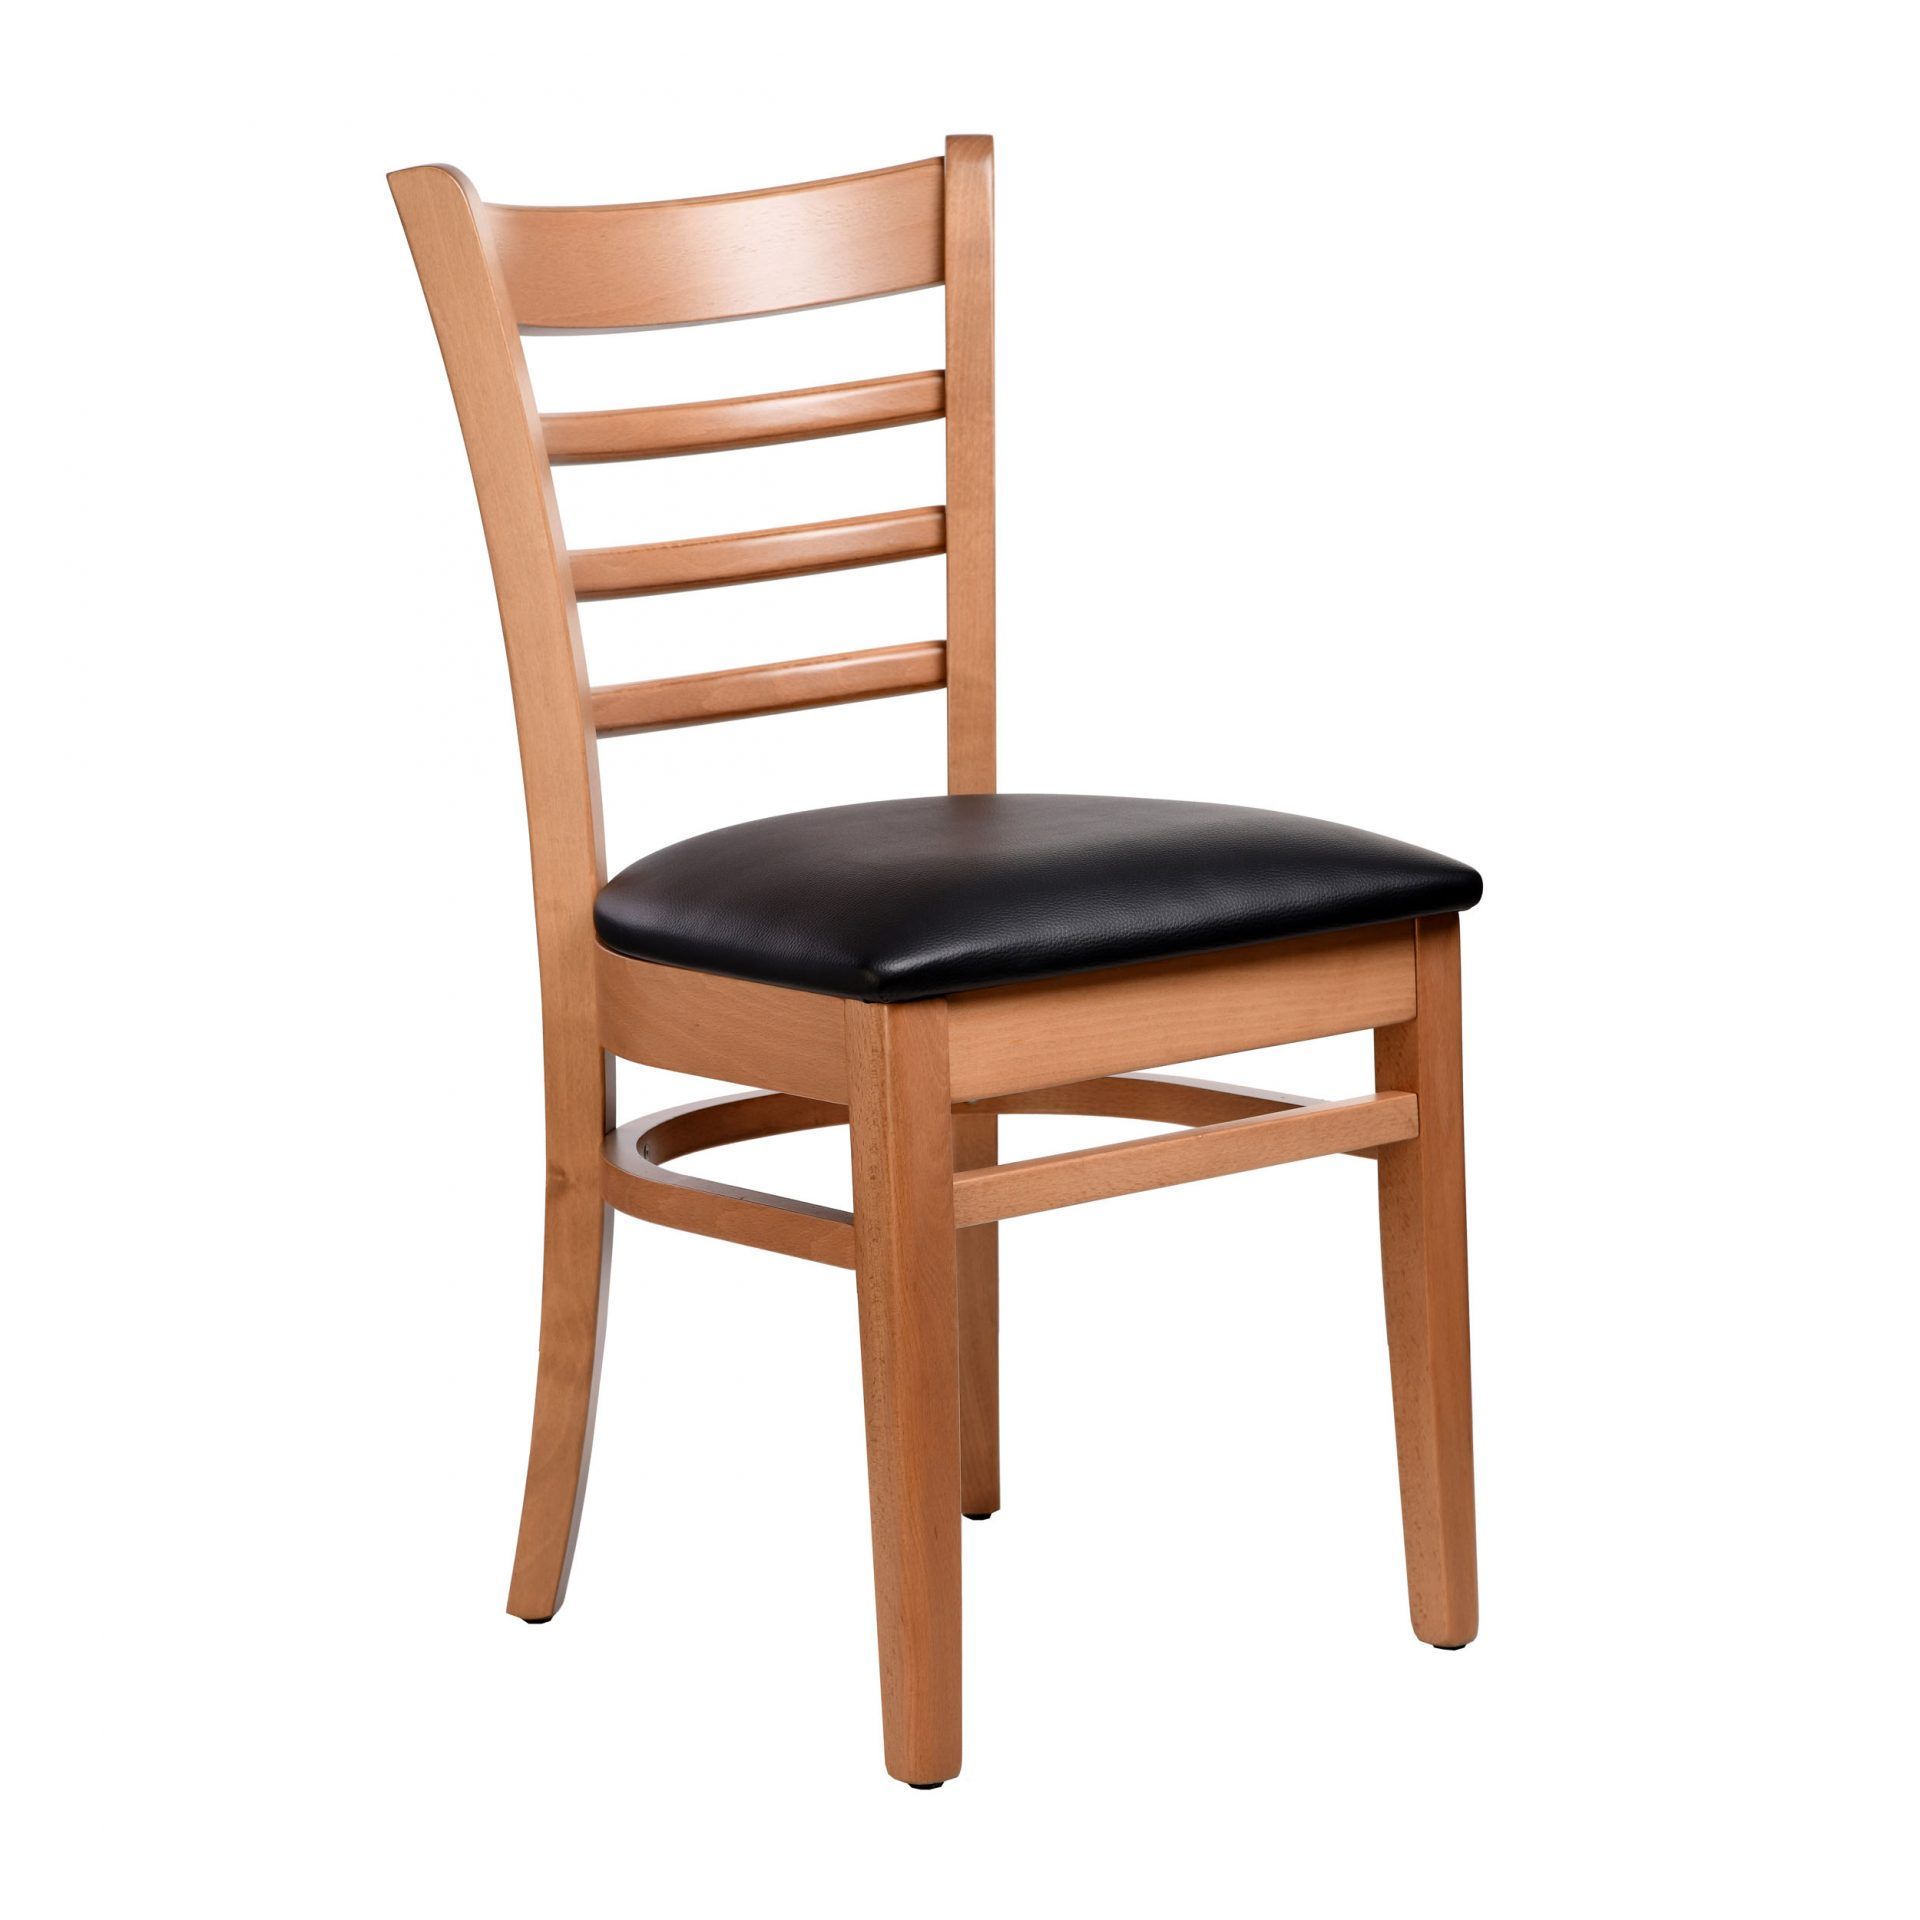 Florence Chair - Natural - Chocolate Vinyl Seat